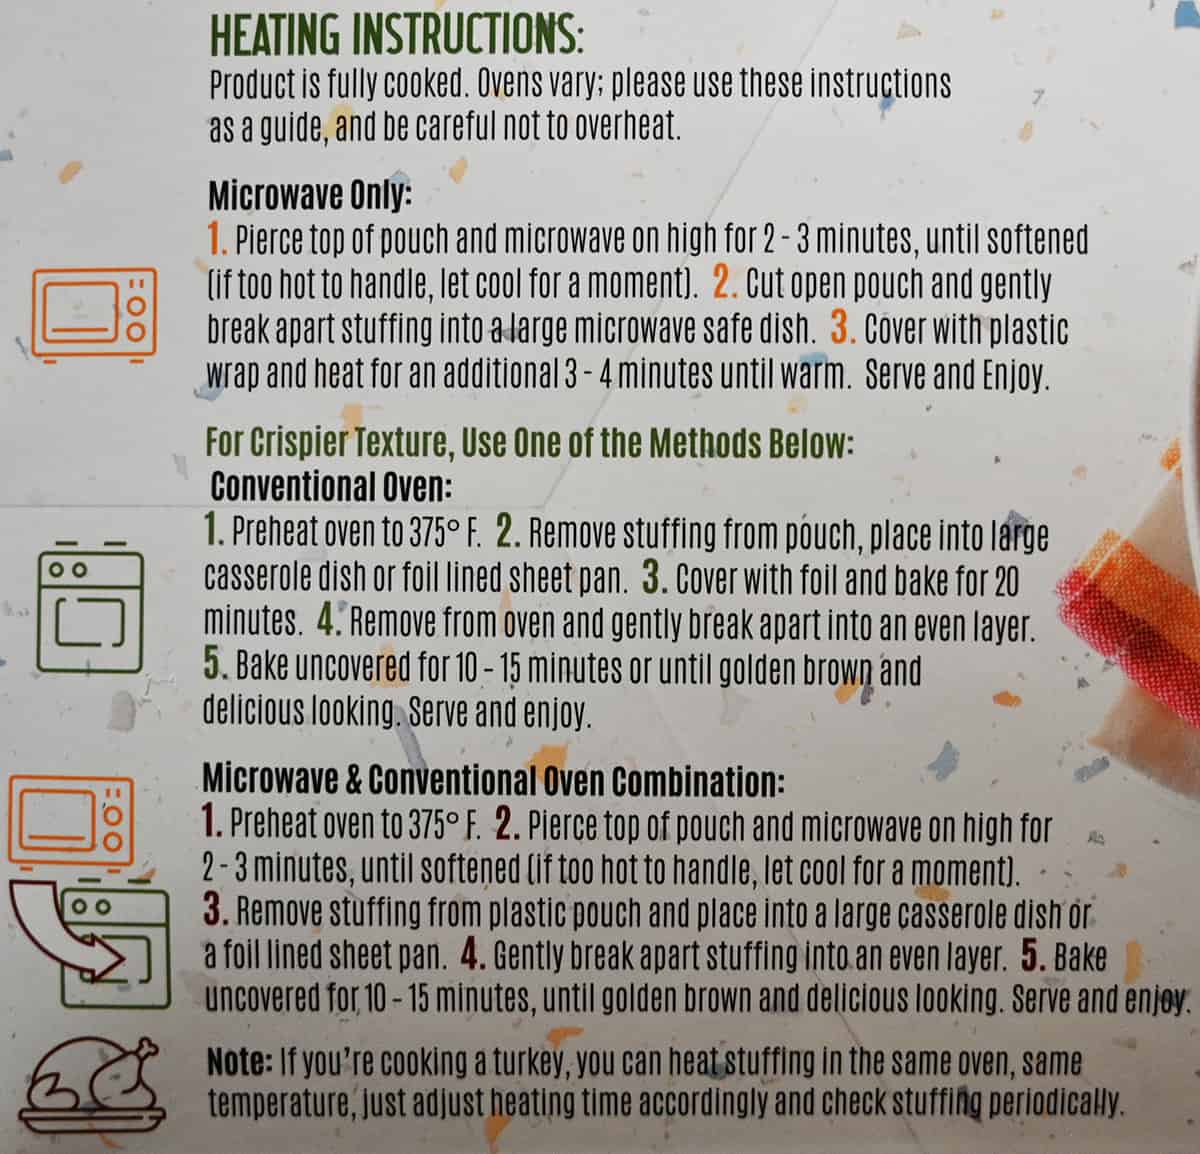 Image of the heating instructions for the stuffing from the back of the box.